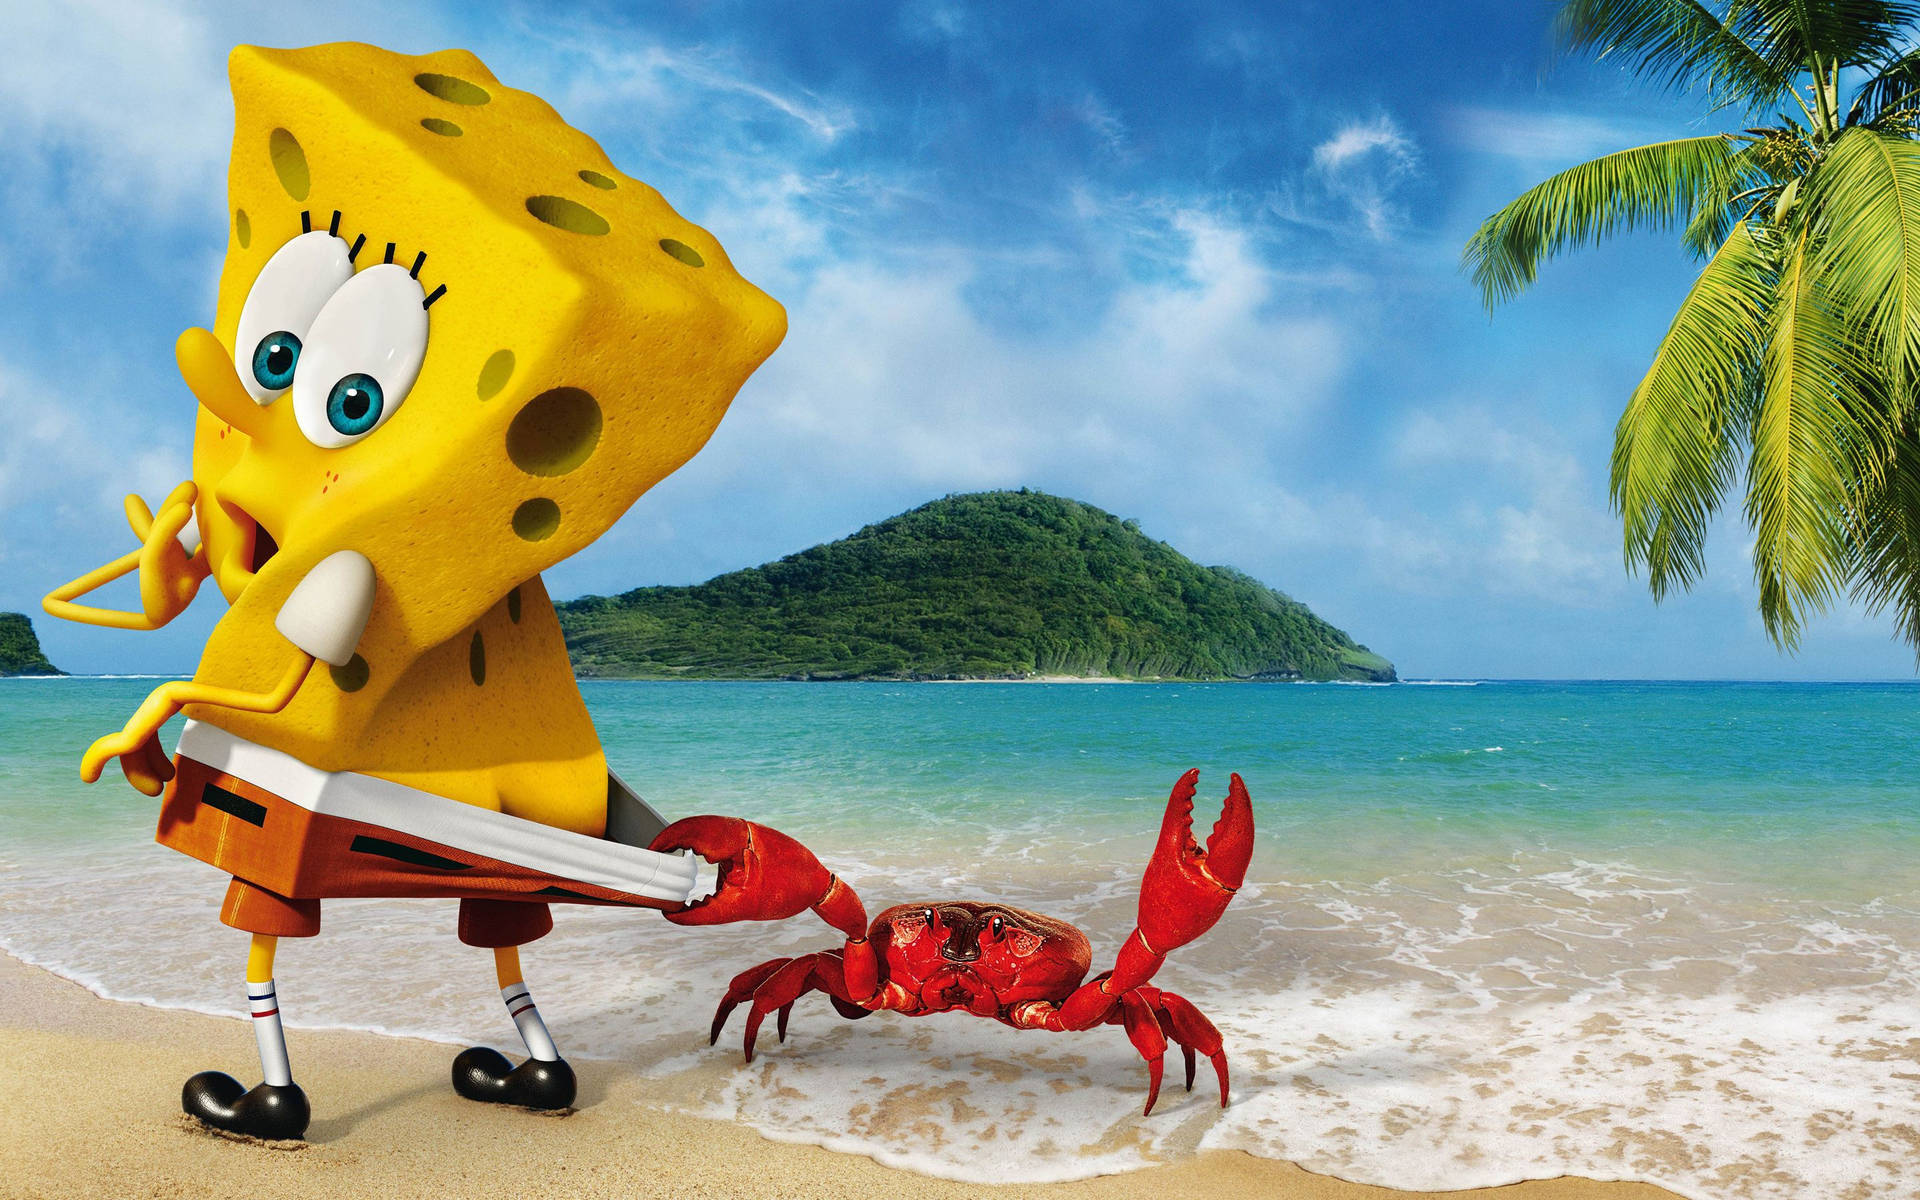 Cute Spongebob Square Pants Pinched By Crab Background